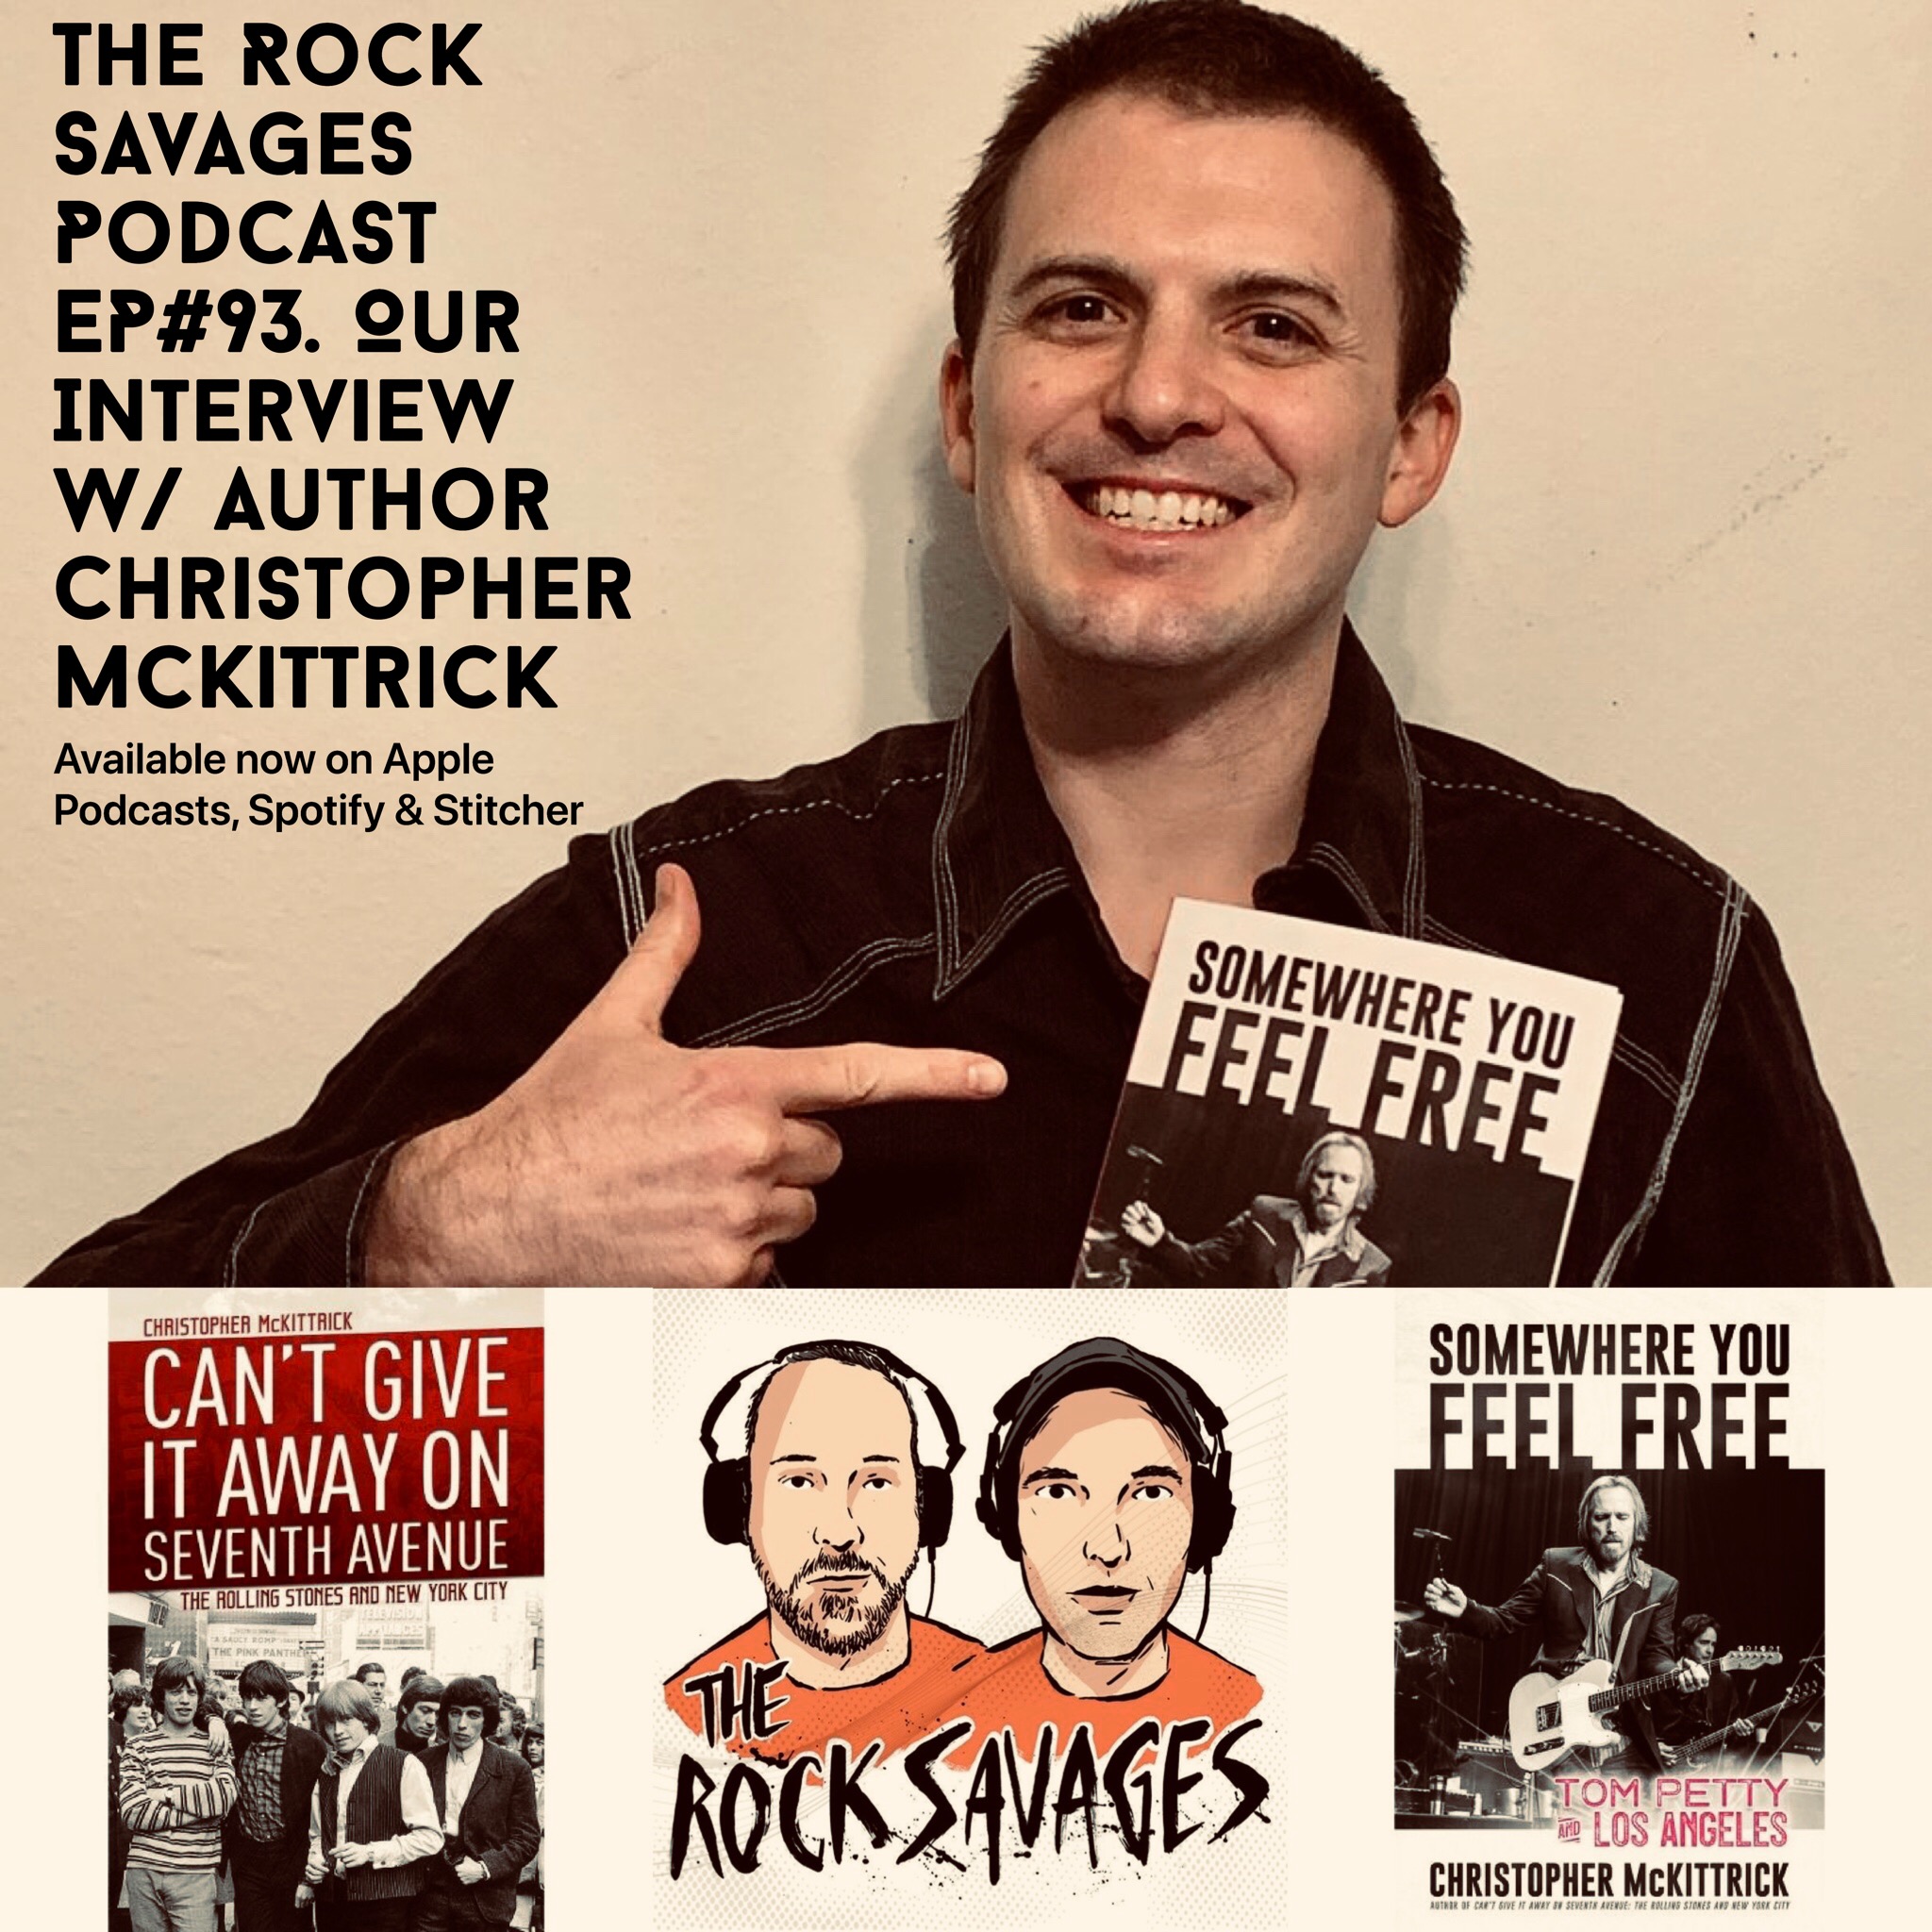 The Rock Savages Podcast Interview Tom Petty Author Christopher McKittrick